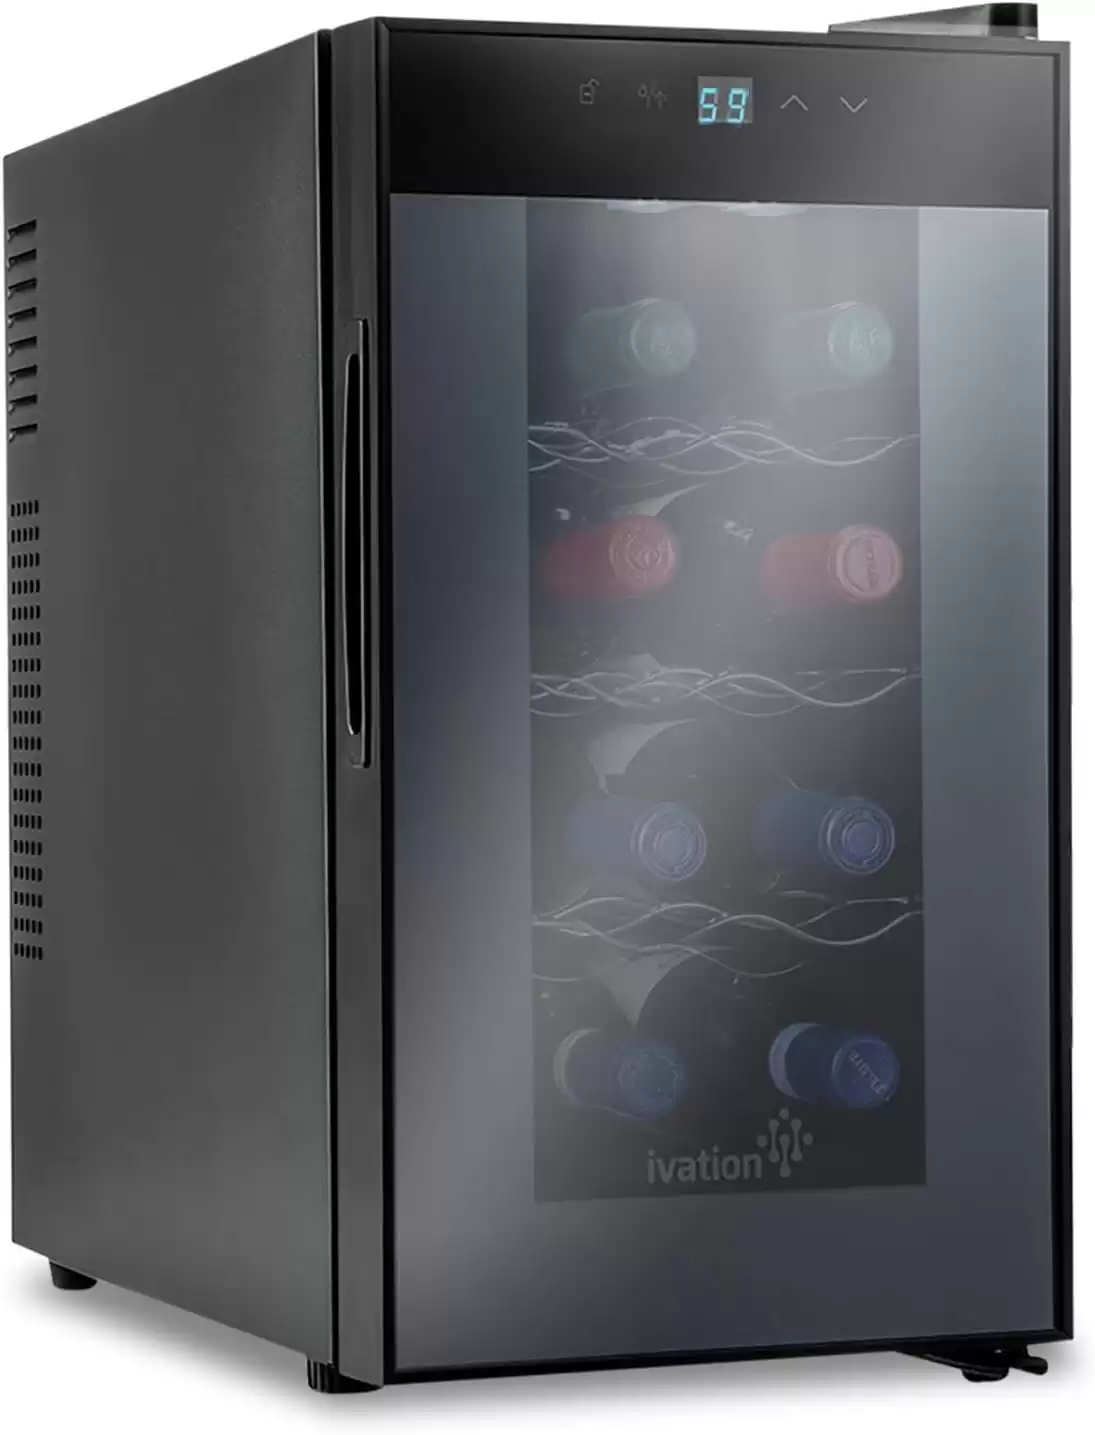 Ivation 8 Bottle Thermoelectric Countertop Wine Cooler with Digital Temperature Display & Quiet Operation Fridge